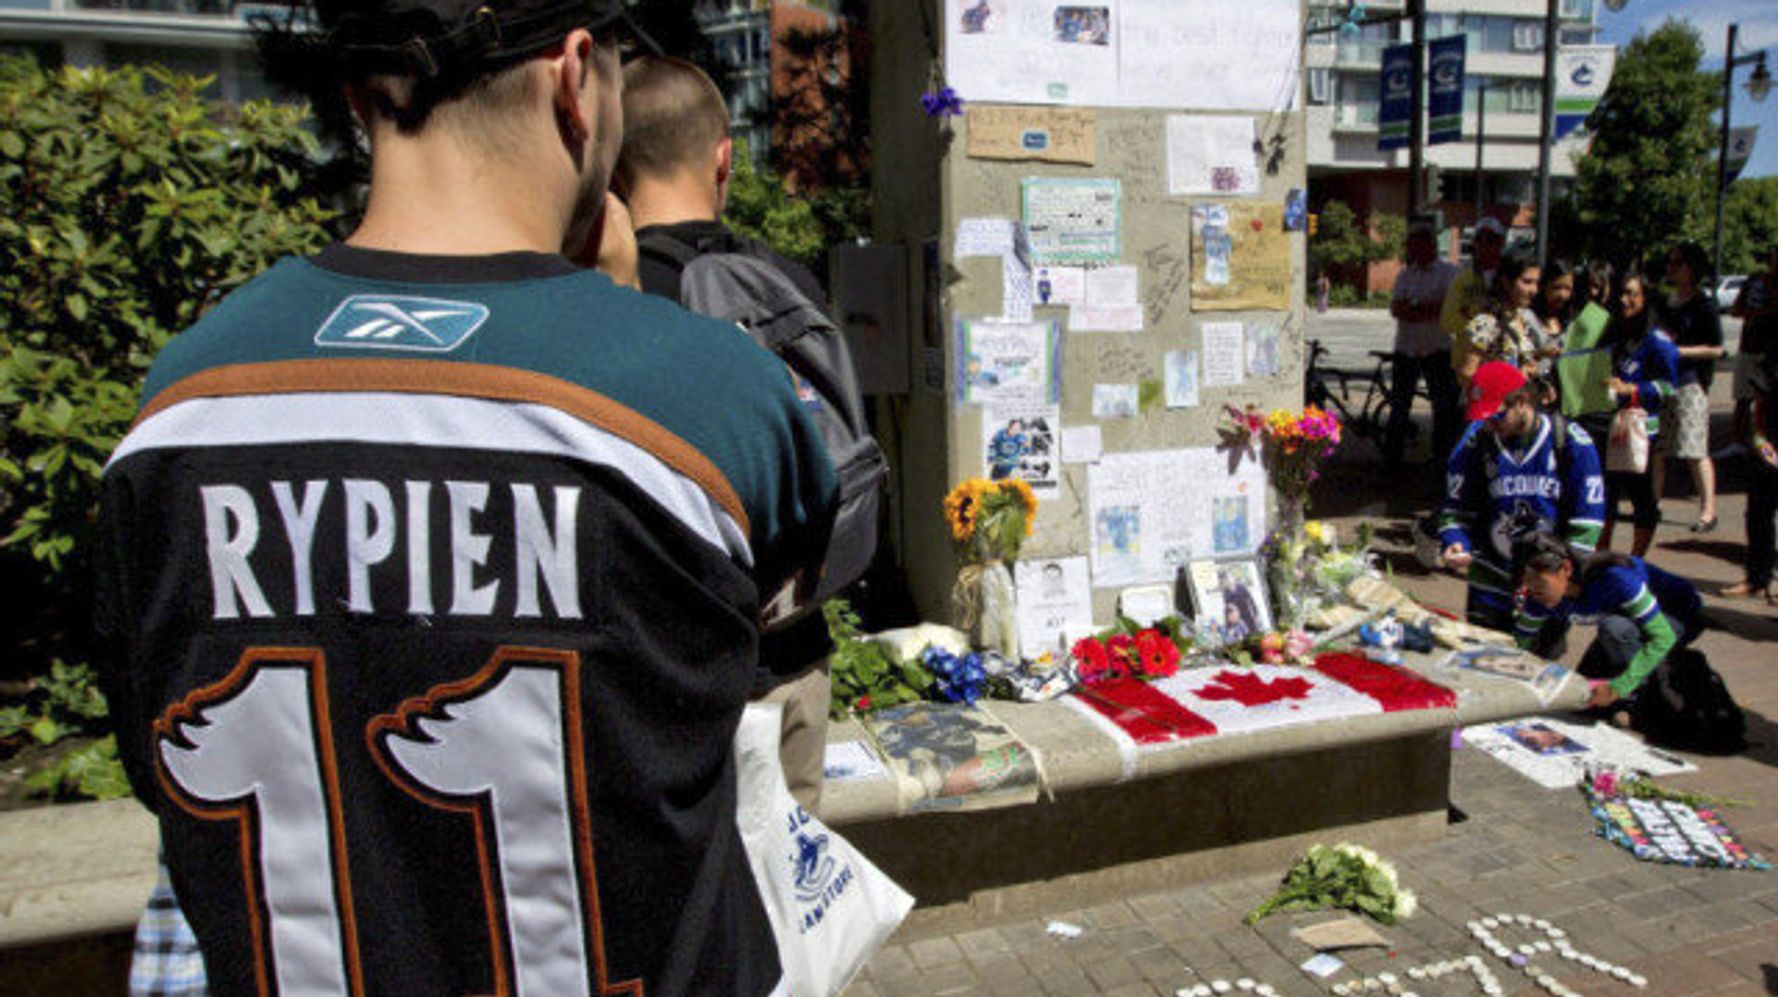 Funeral for Rypien attracts close to 1000 people